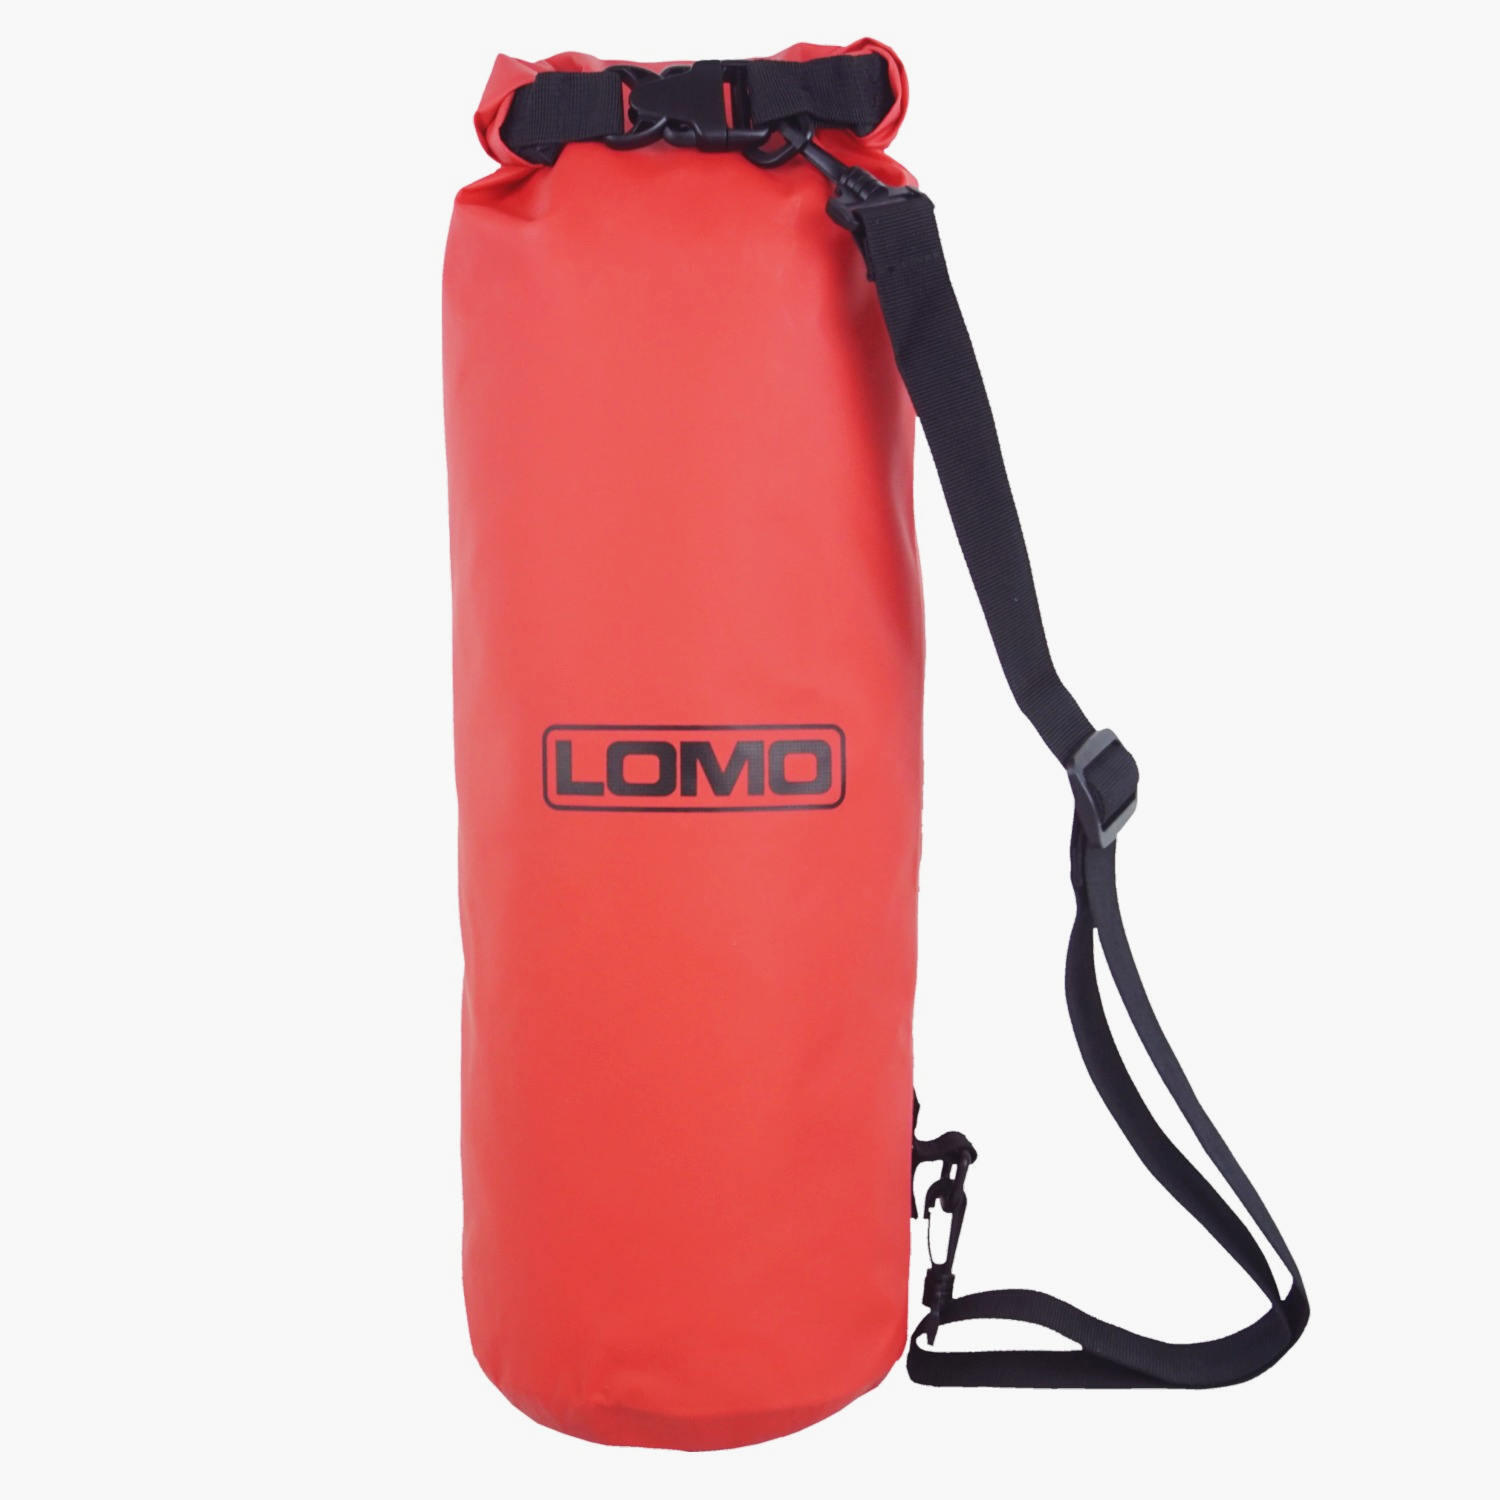 Lomo 12L Drybags - Red heavy duty with shoulder strap 7/7